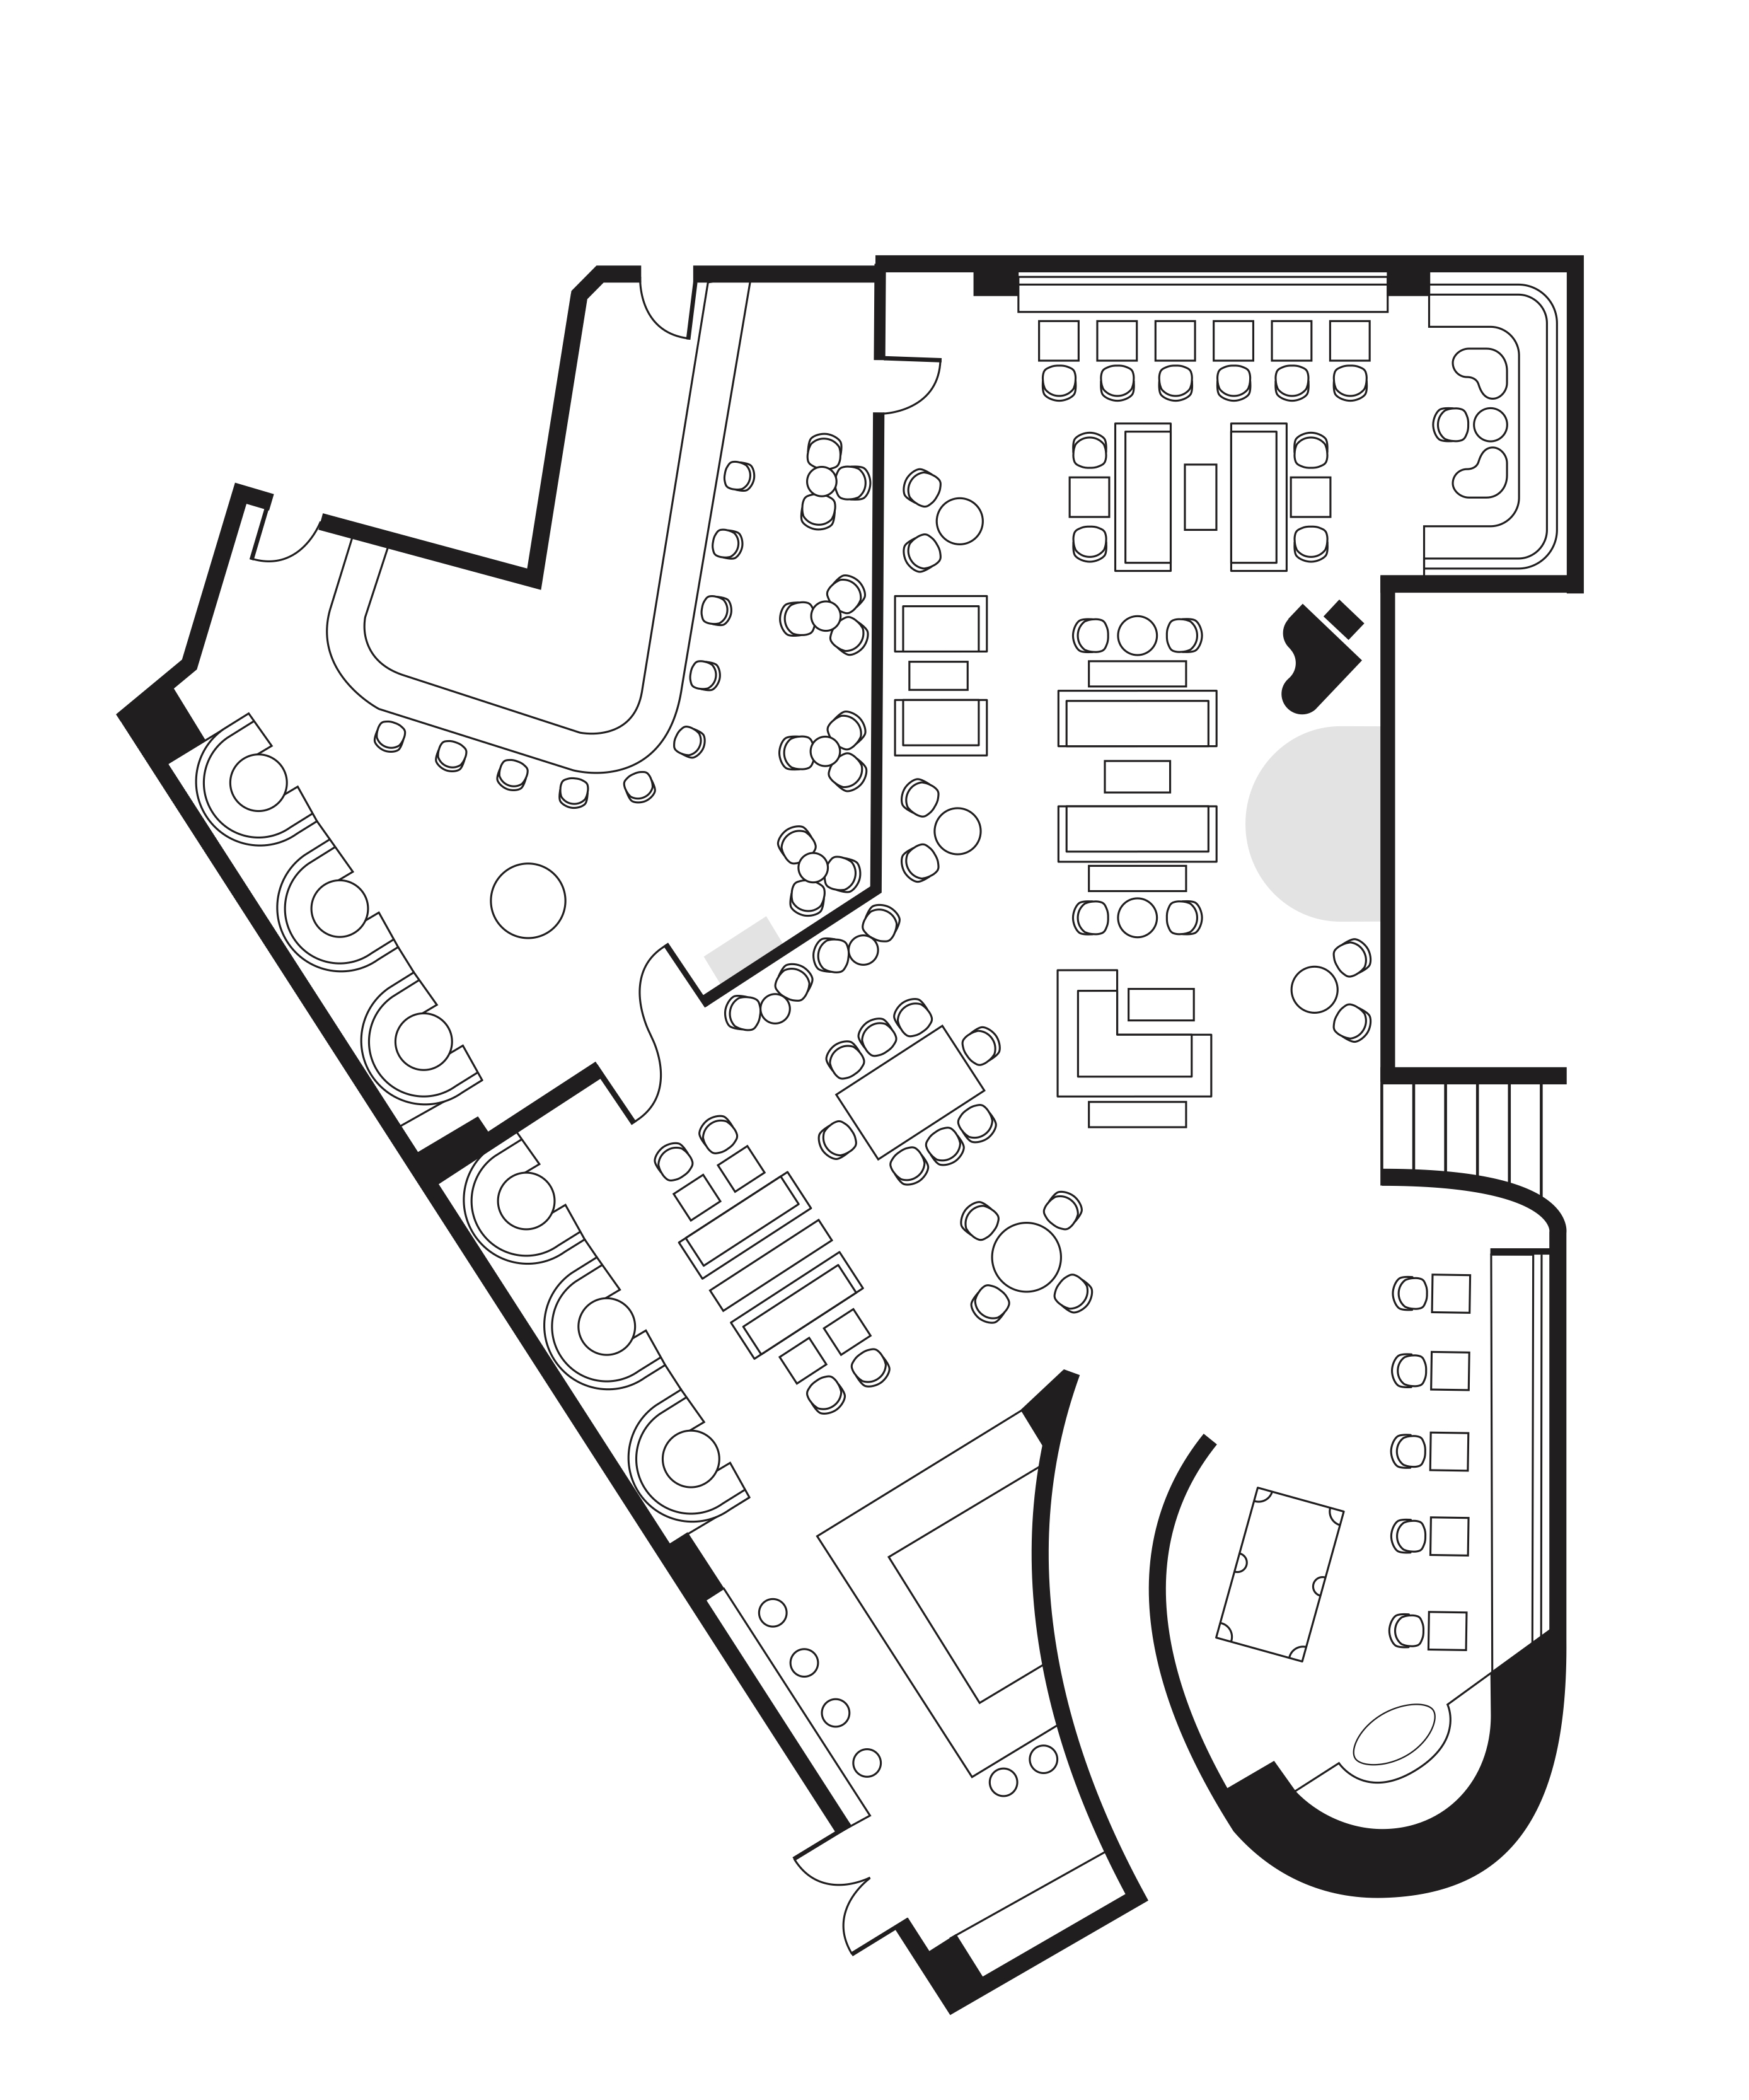 Roxy bar floor plan for private events.